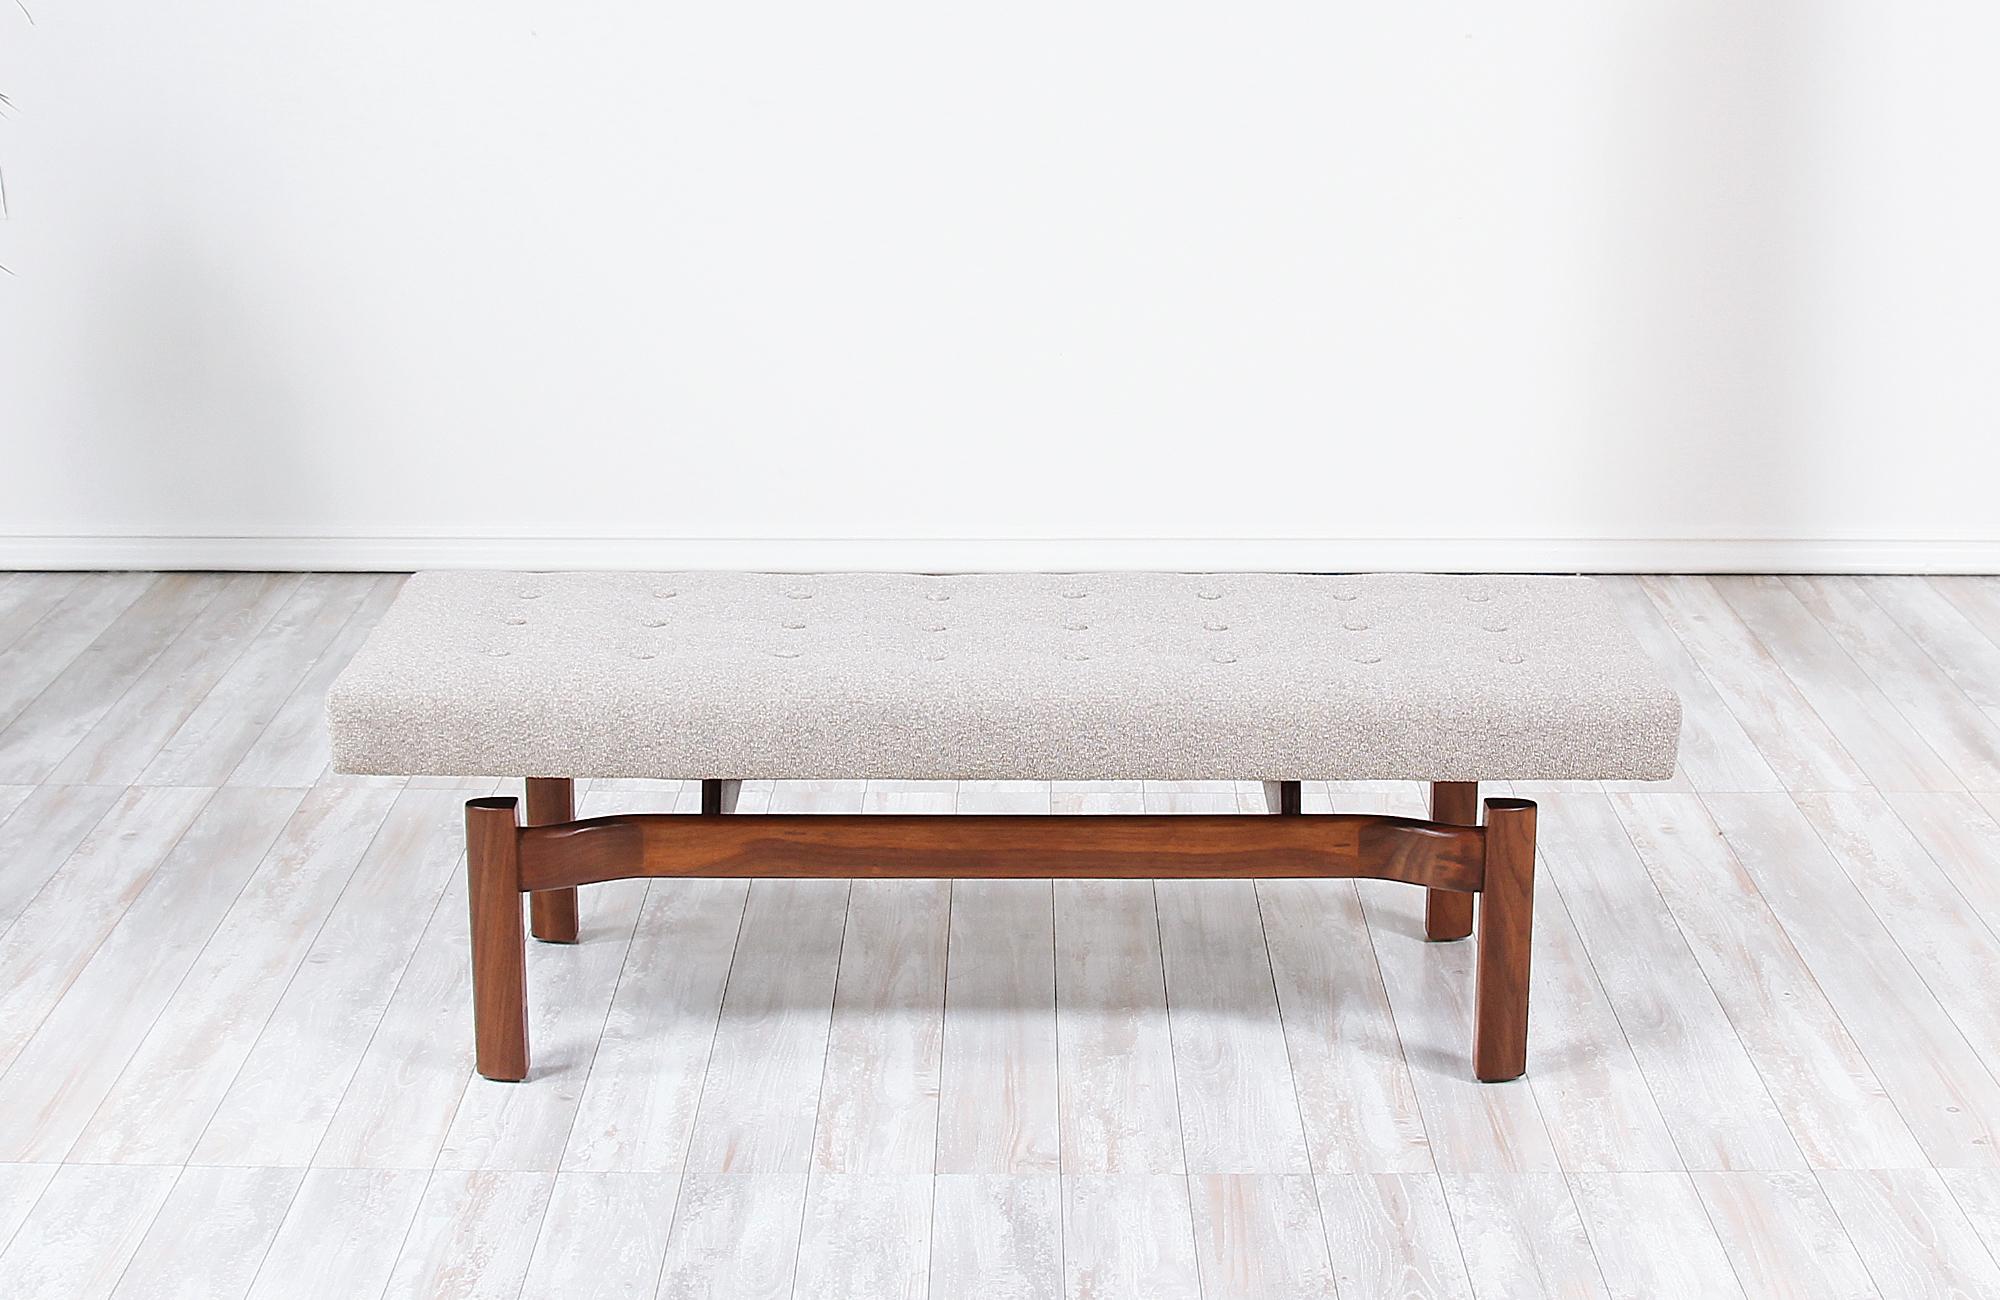 Mid-Century Modern bench designed and manufactured in the United States, circa 1950s. This elegant bench features a solid walnut wood frame with a newly upholstered cushion that seems to float over the base creating a look of sophistication. The